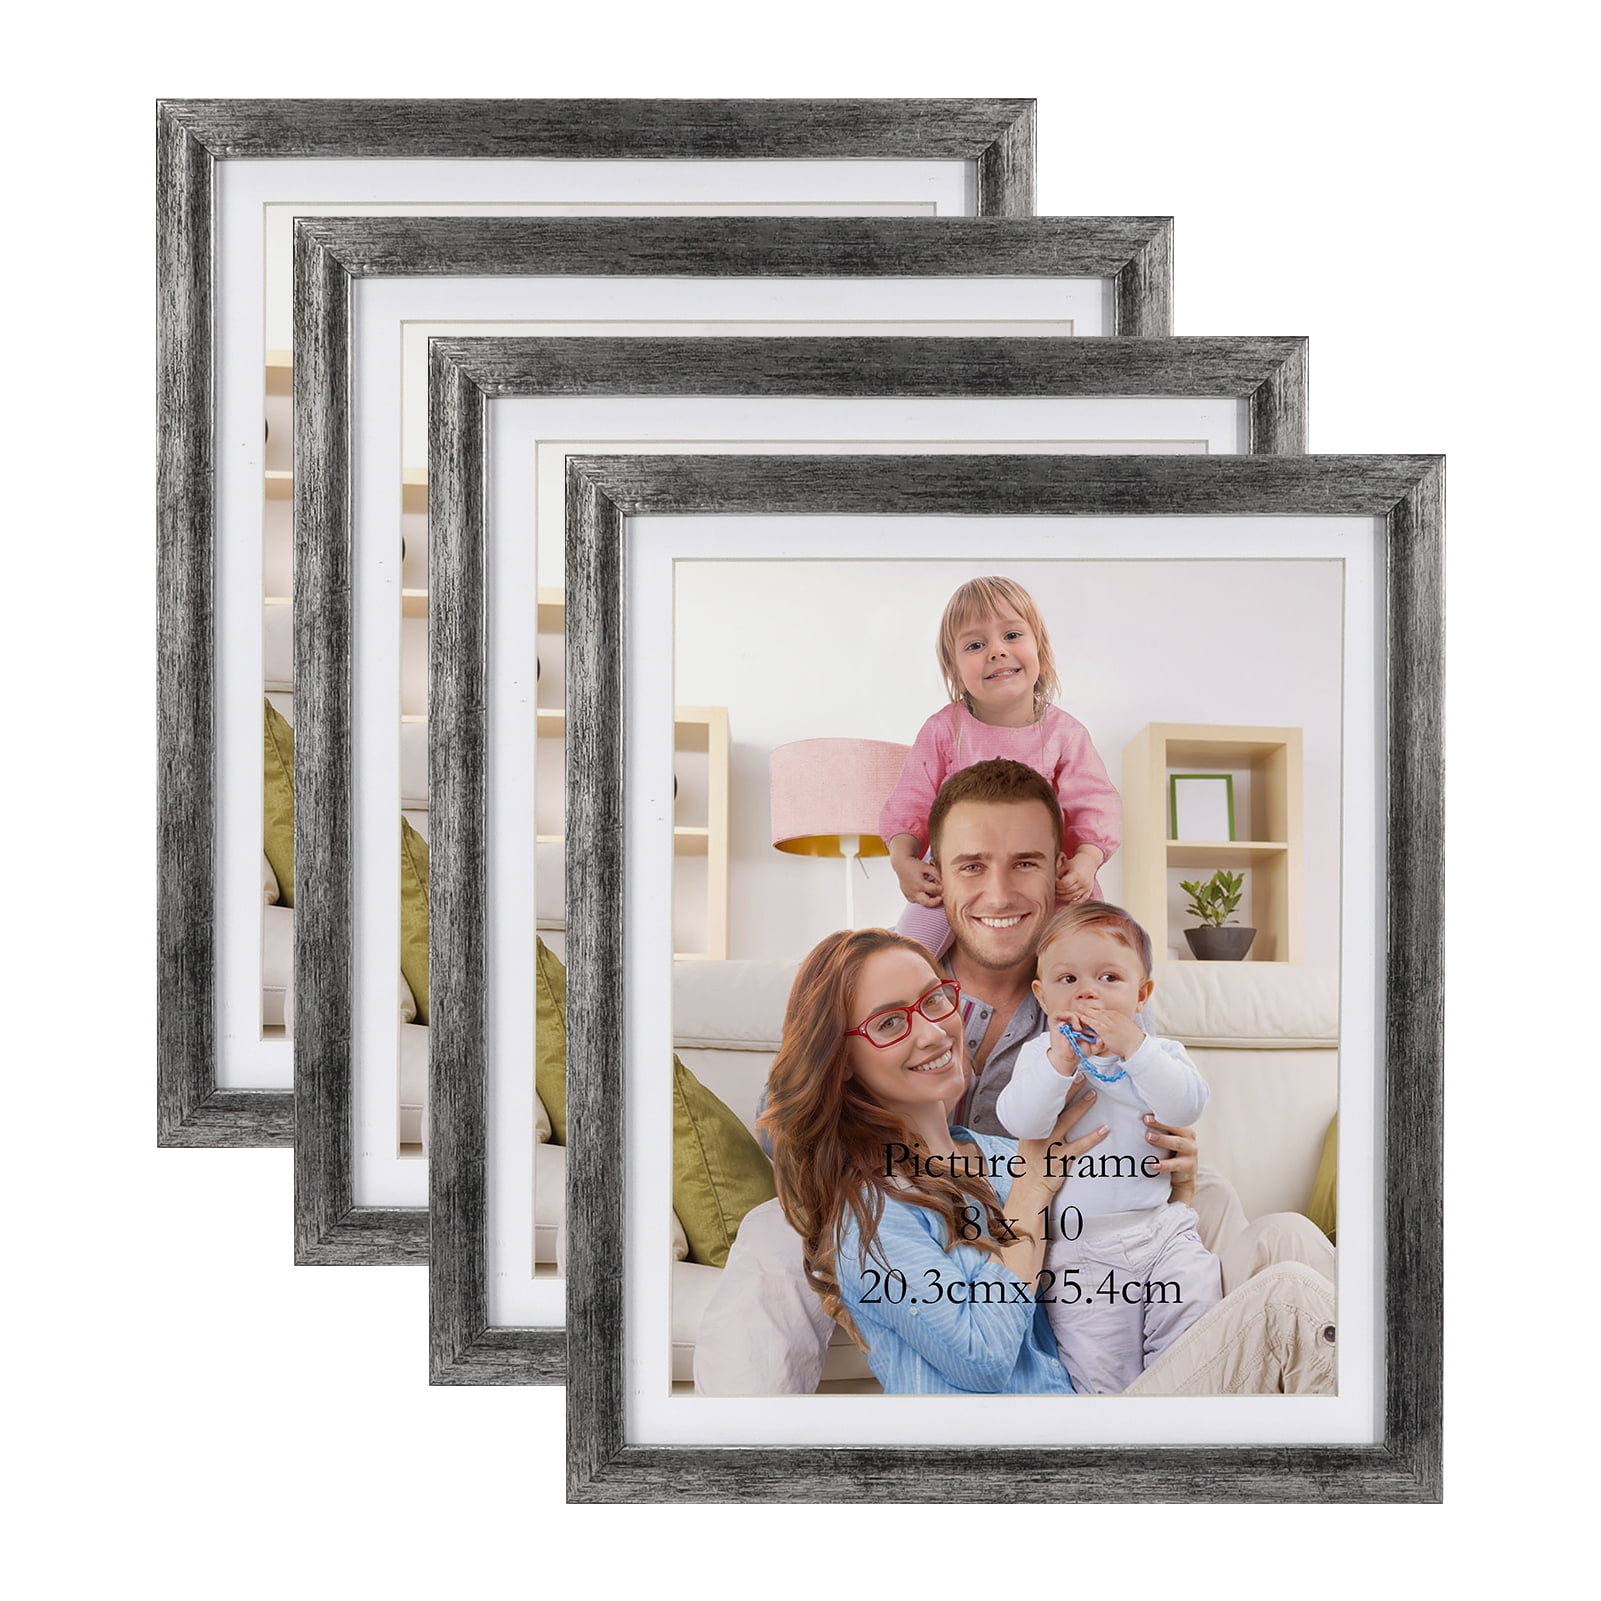 Giftgarden White 4x6 Picture Frame 7 Pack, Modern White Woodgrain 4 by 6  Photo Frames for Wall or Tabletop Display